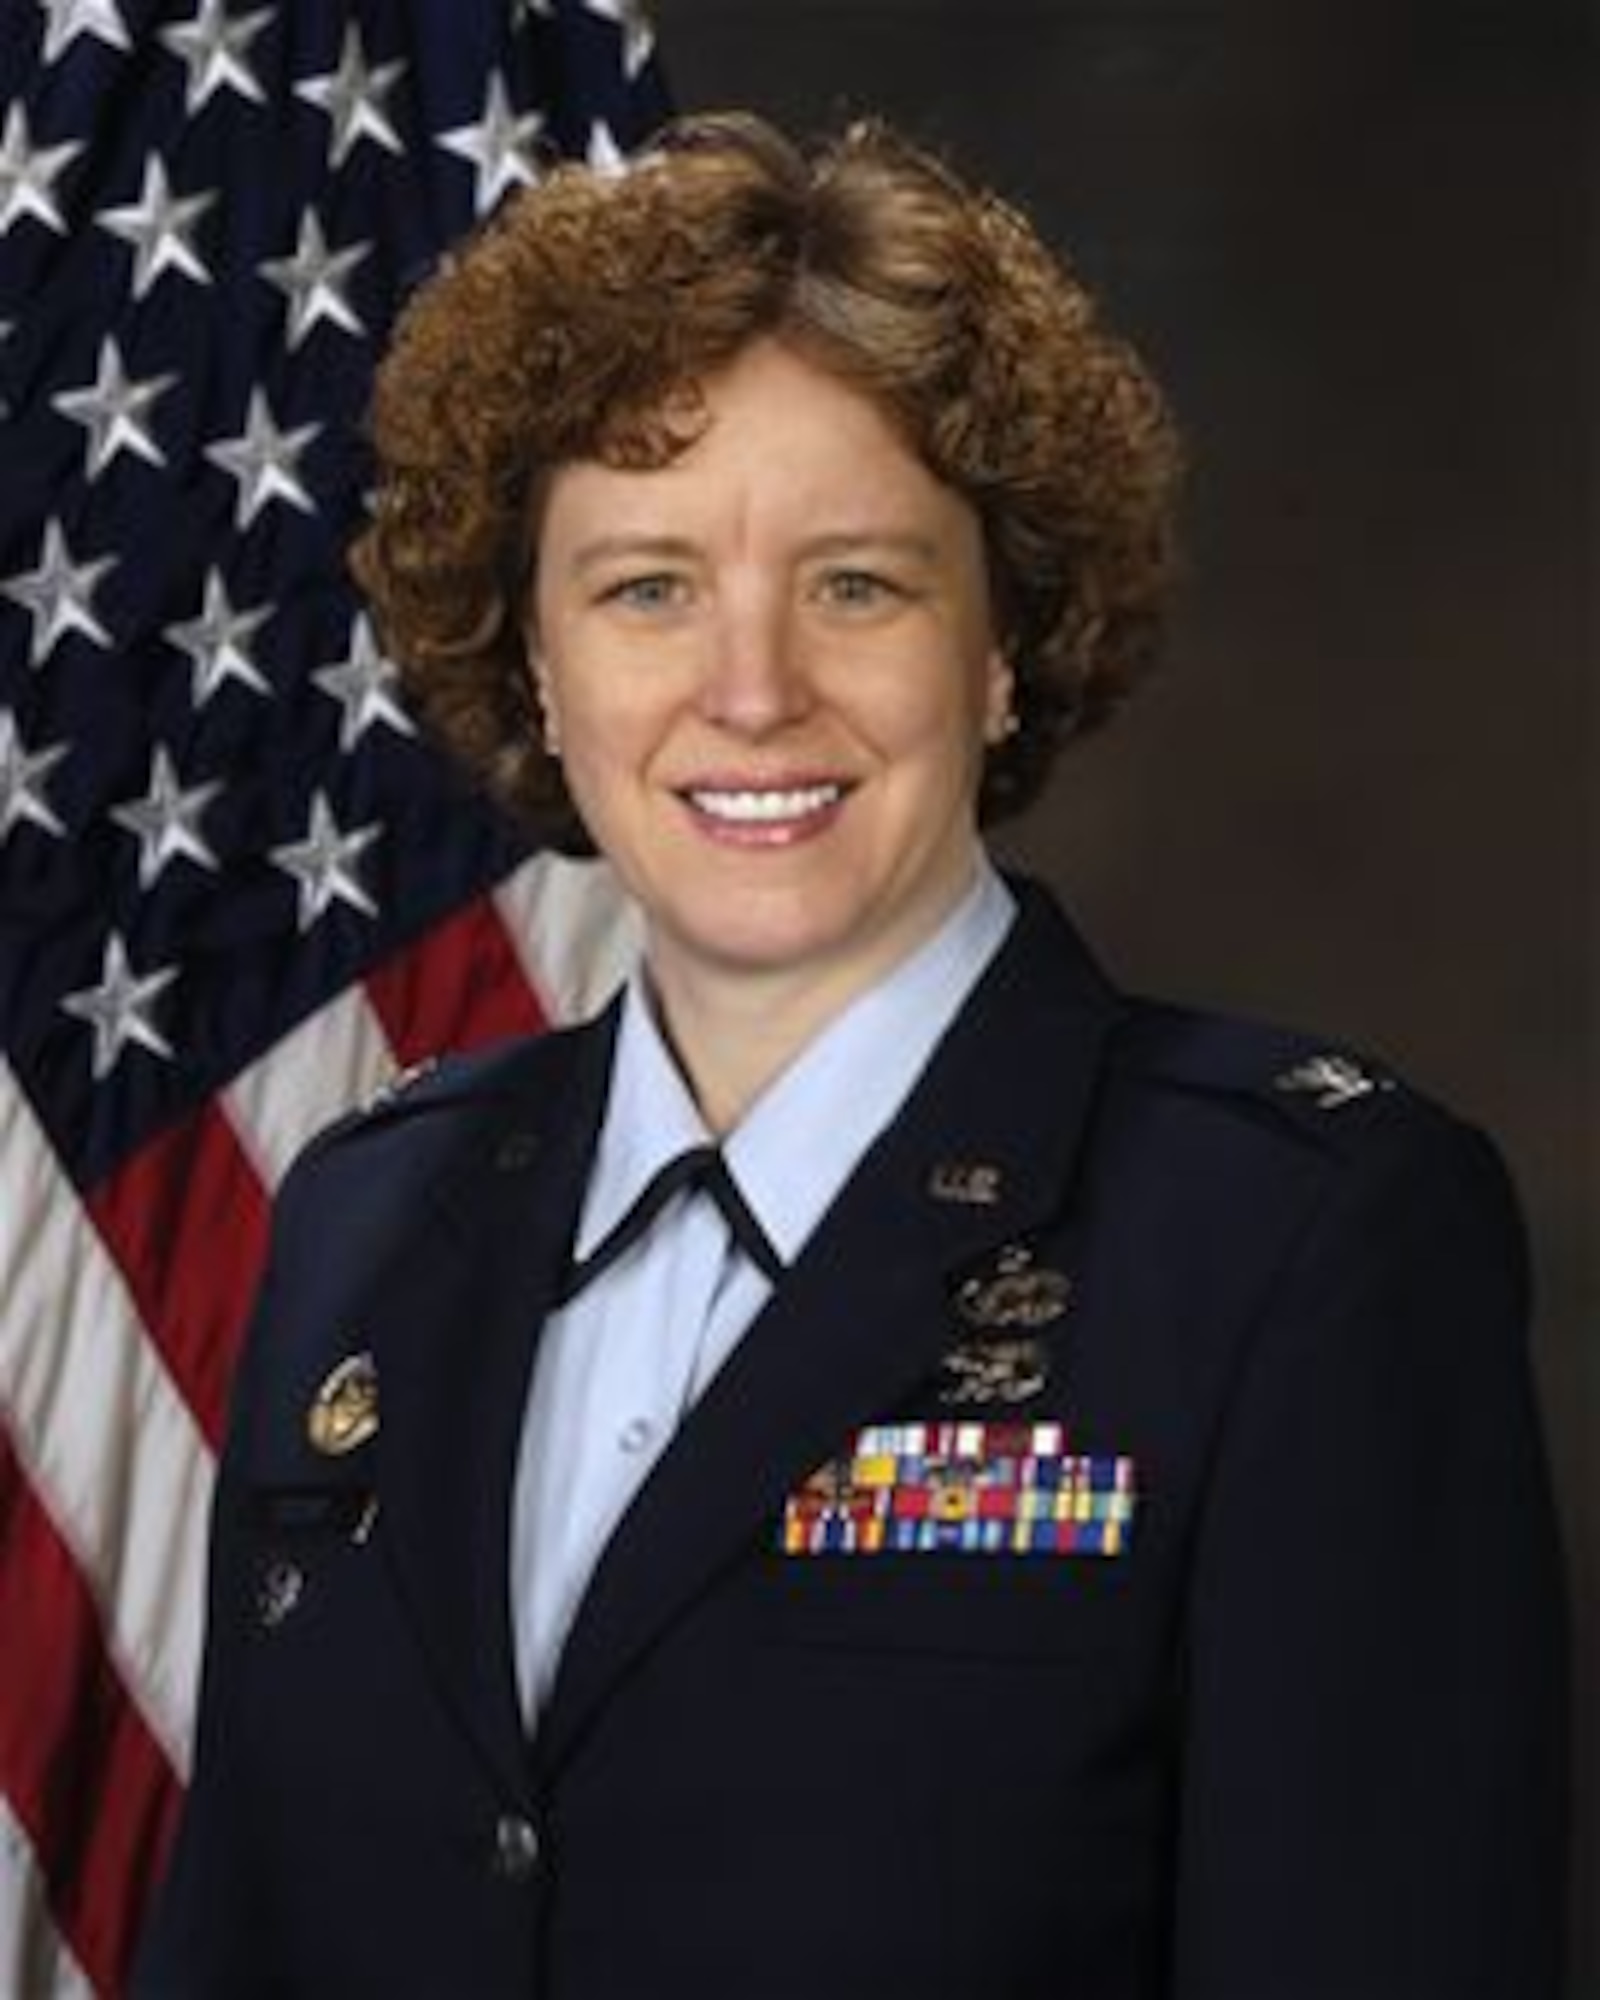 Col. Teresa Quick, vice commander of the Air Force Life Cycle Management Center, retires Nov. 16 after more than 30 years of service.